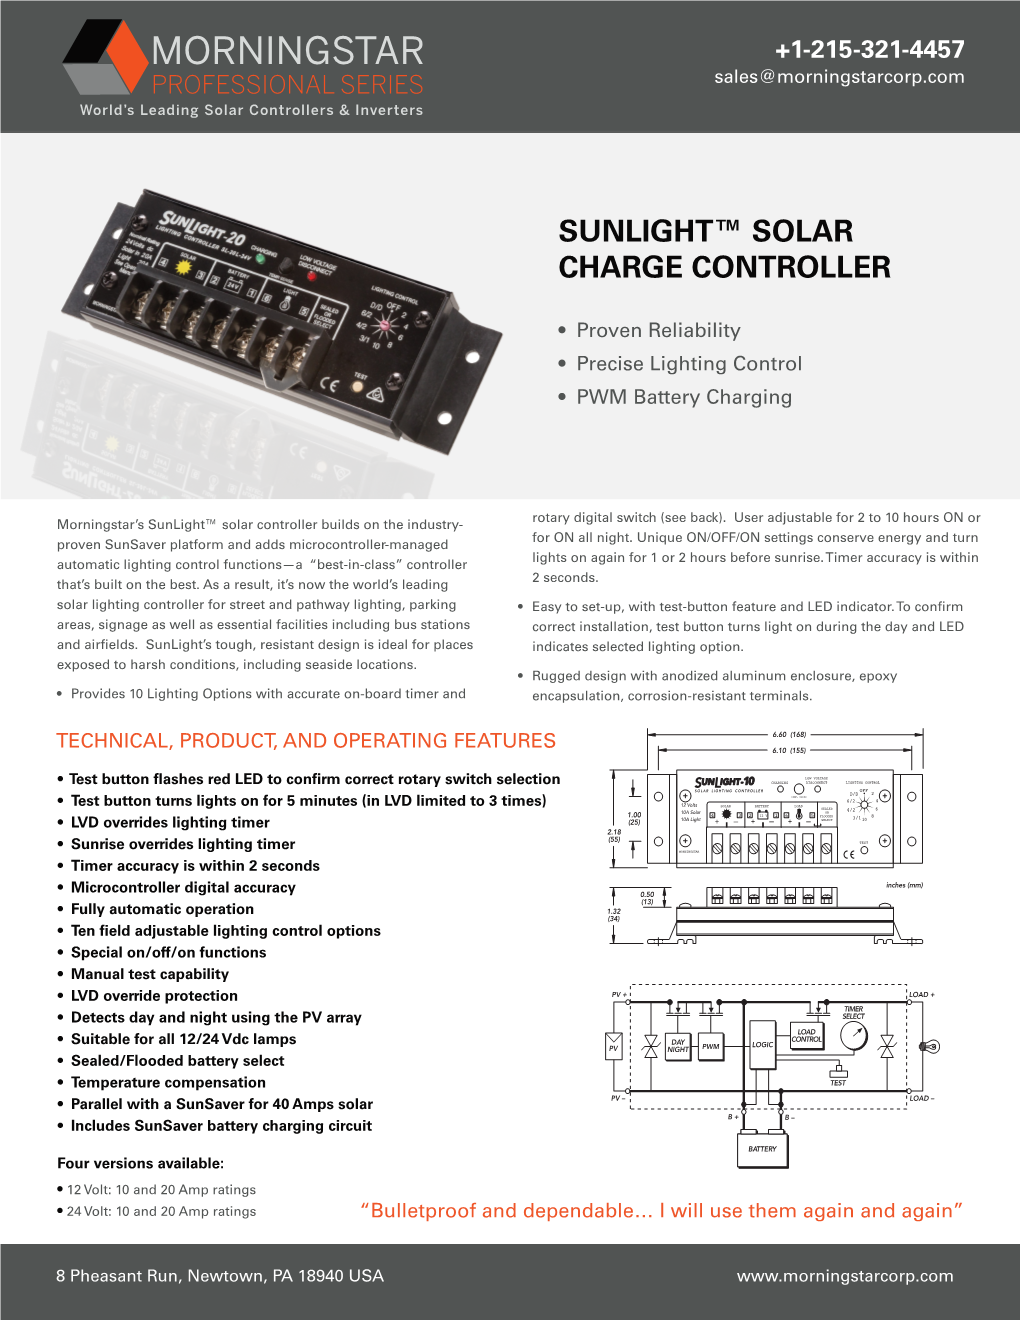 Sunlight™ Solar Charge Controller